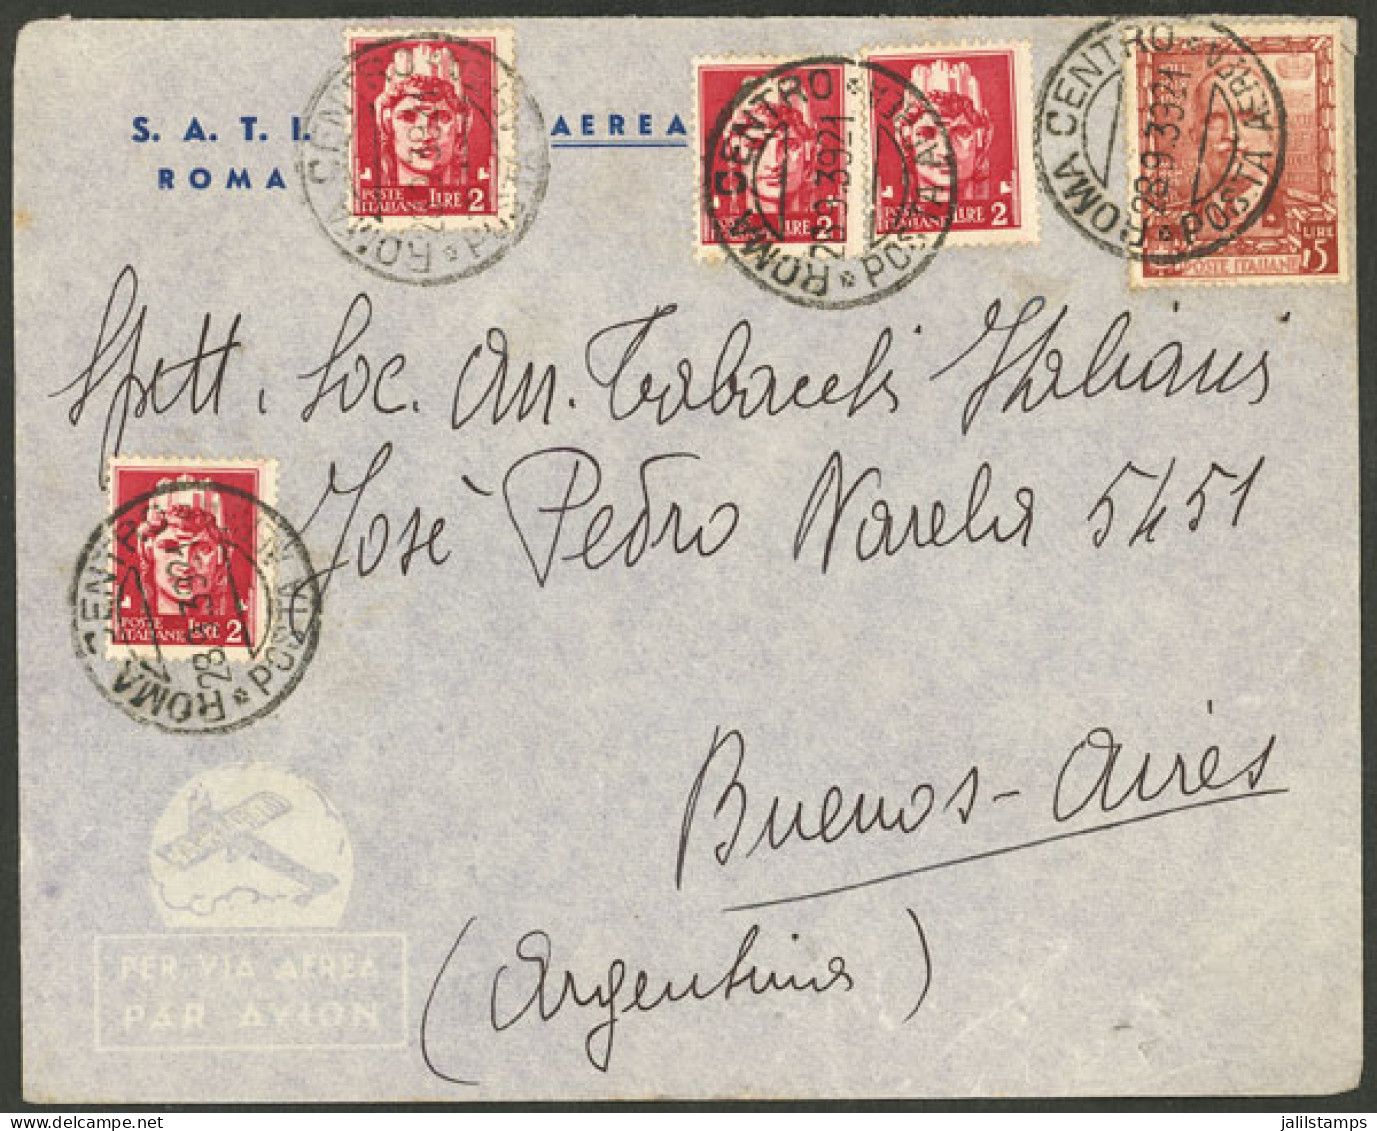 ITALY: 28/SE/1939 Roma - Argentina, Airmail Cover Franked With 13L. Including 5L. "Proclamation" (Sc.409), Very Fine Qua - Unclassified